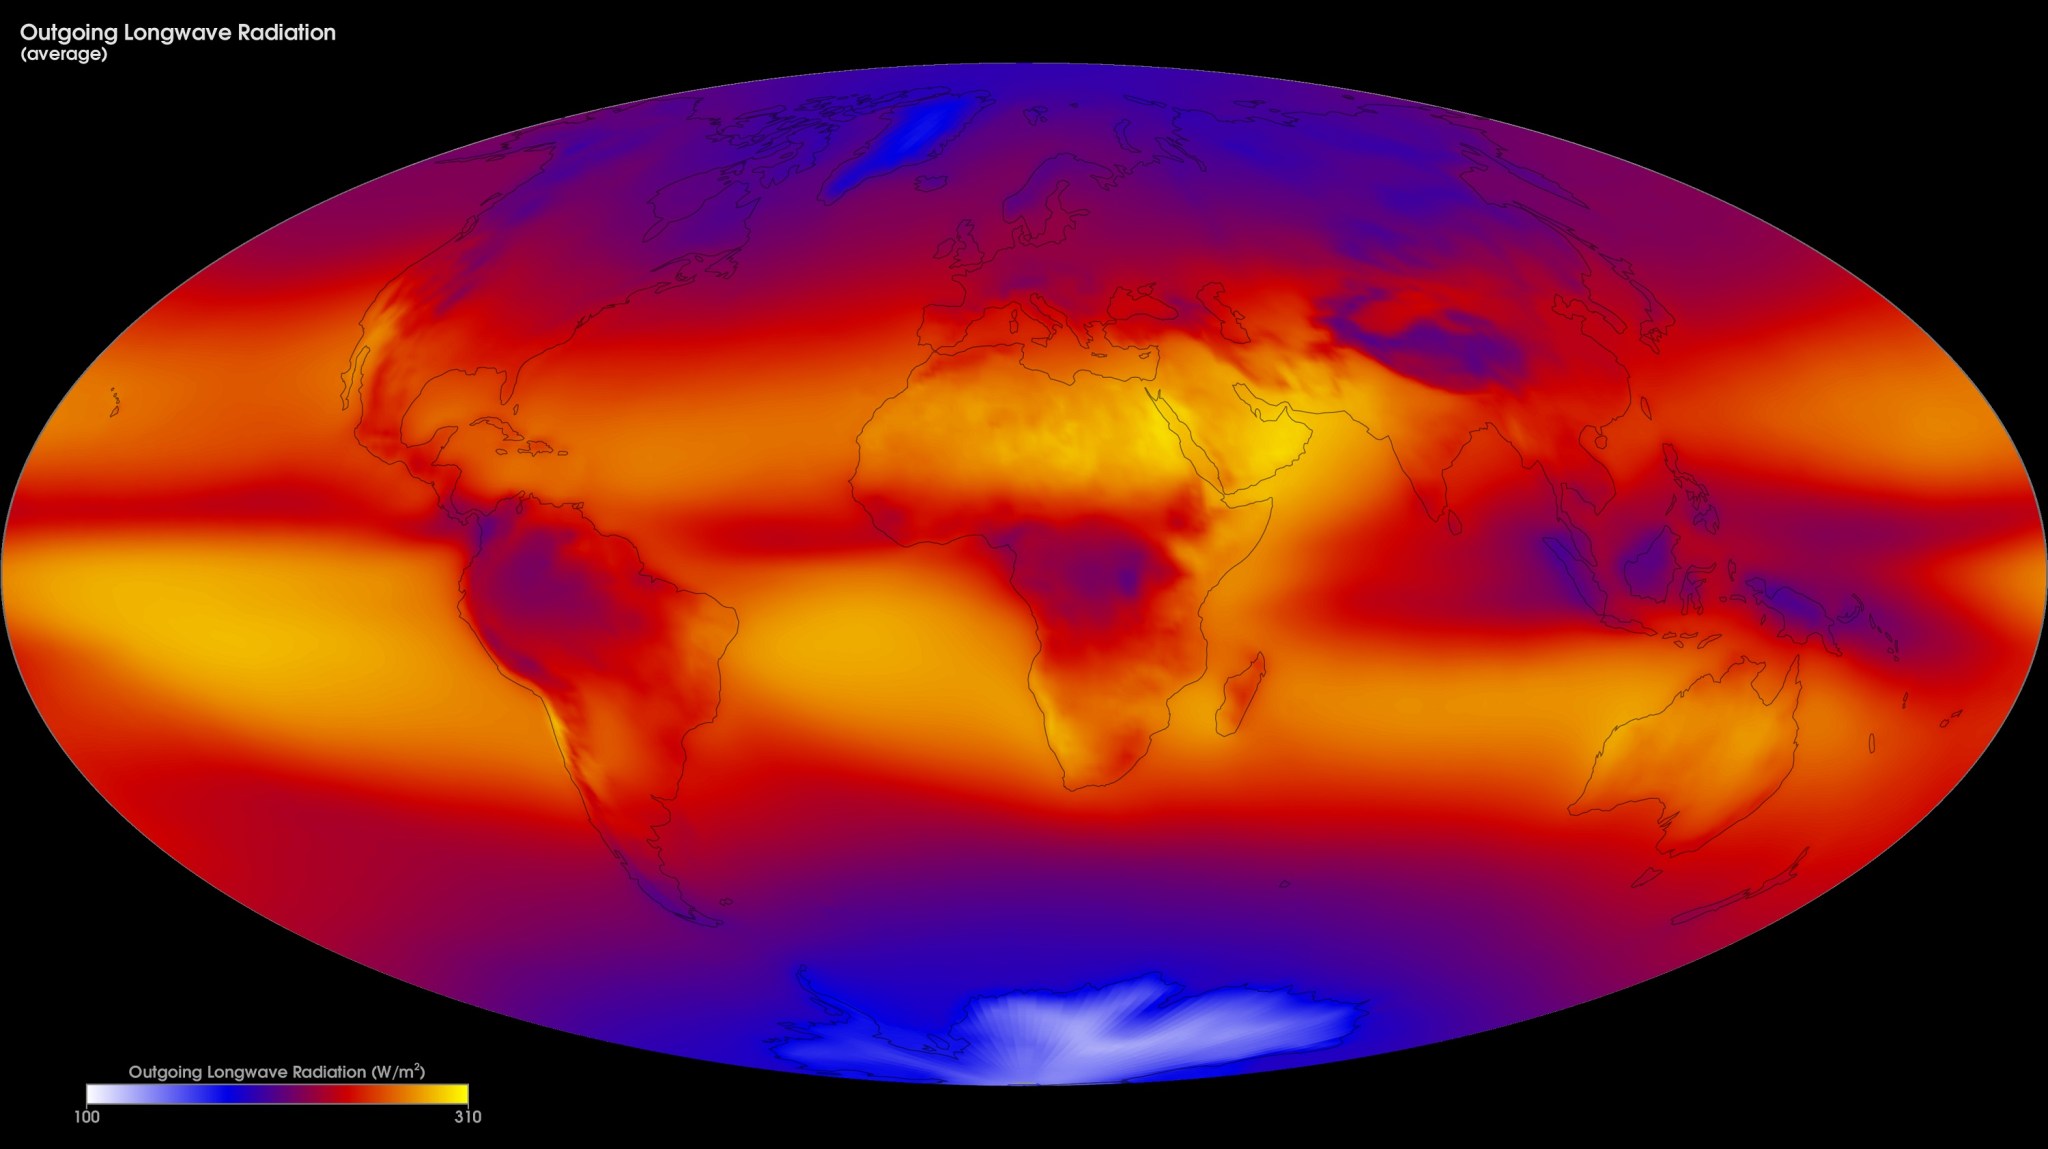 Earth’s outgoing longwave, or heat, radiation shown here as the average from 2000 to 2015